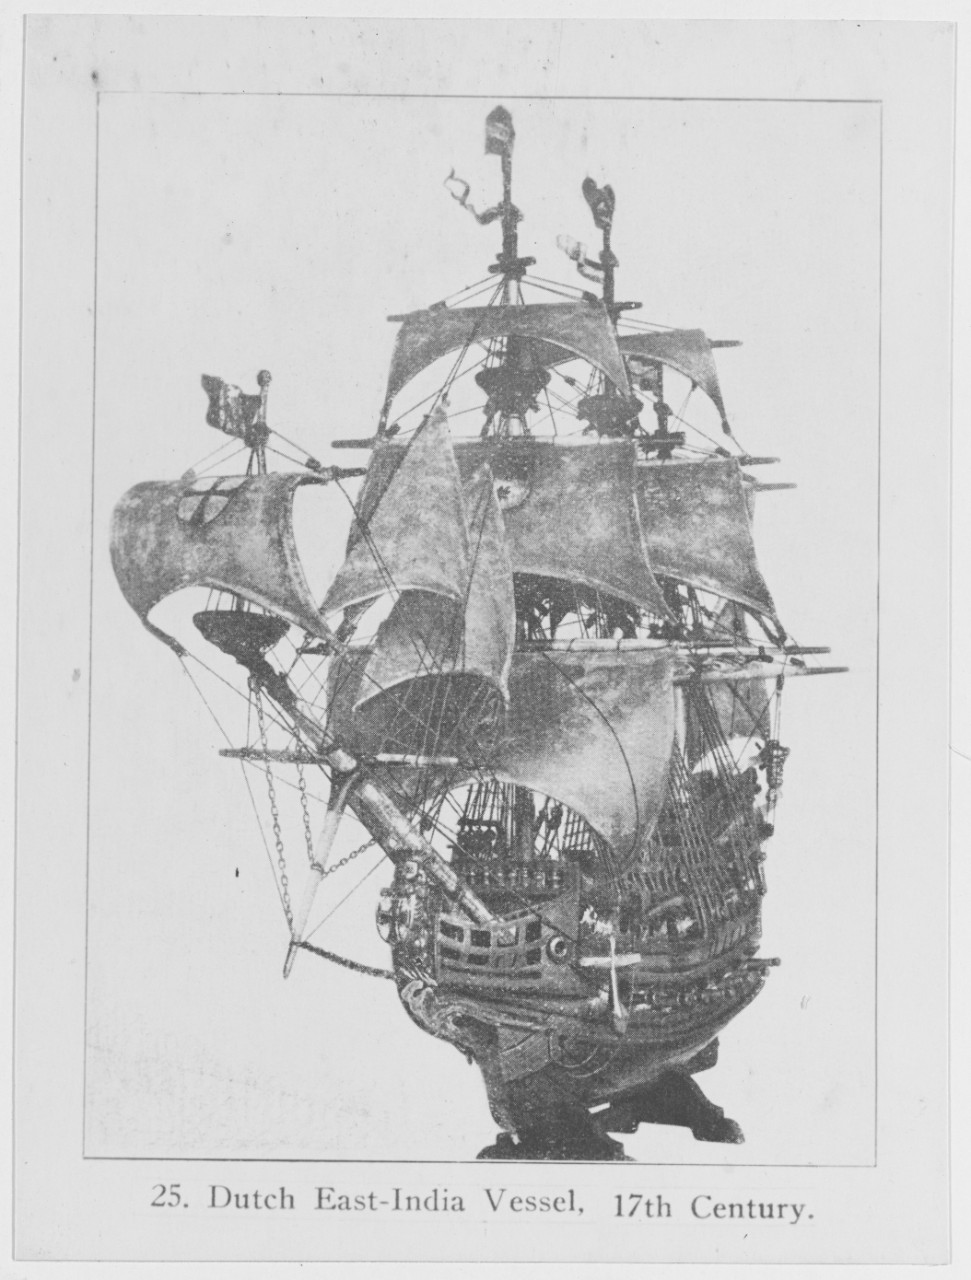 Model of a Dutch East-India Vessel, 17th Century